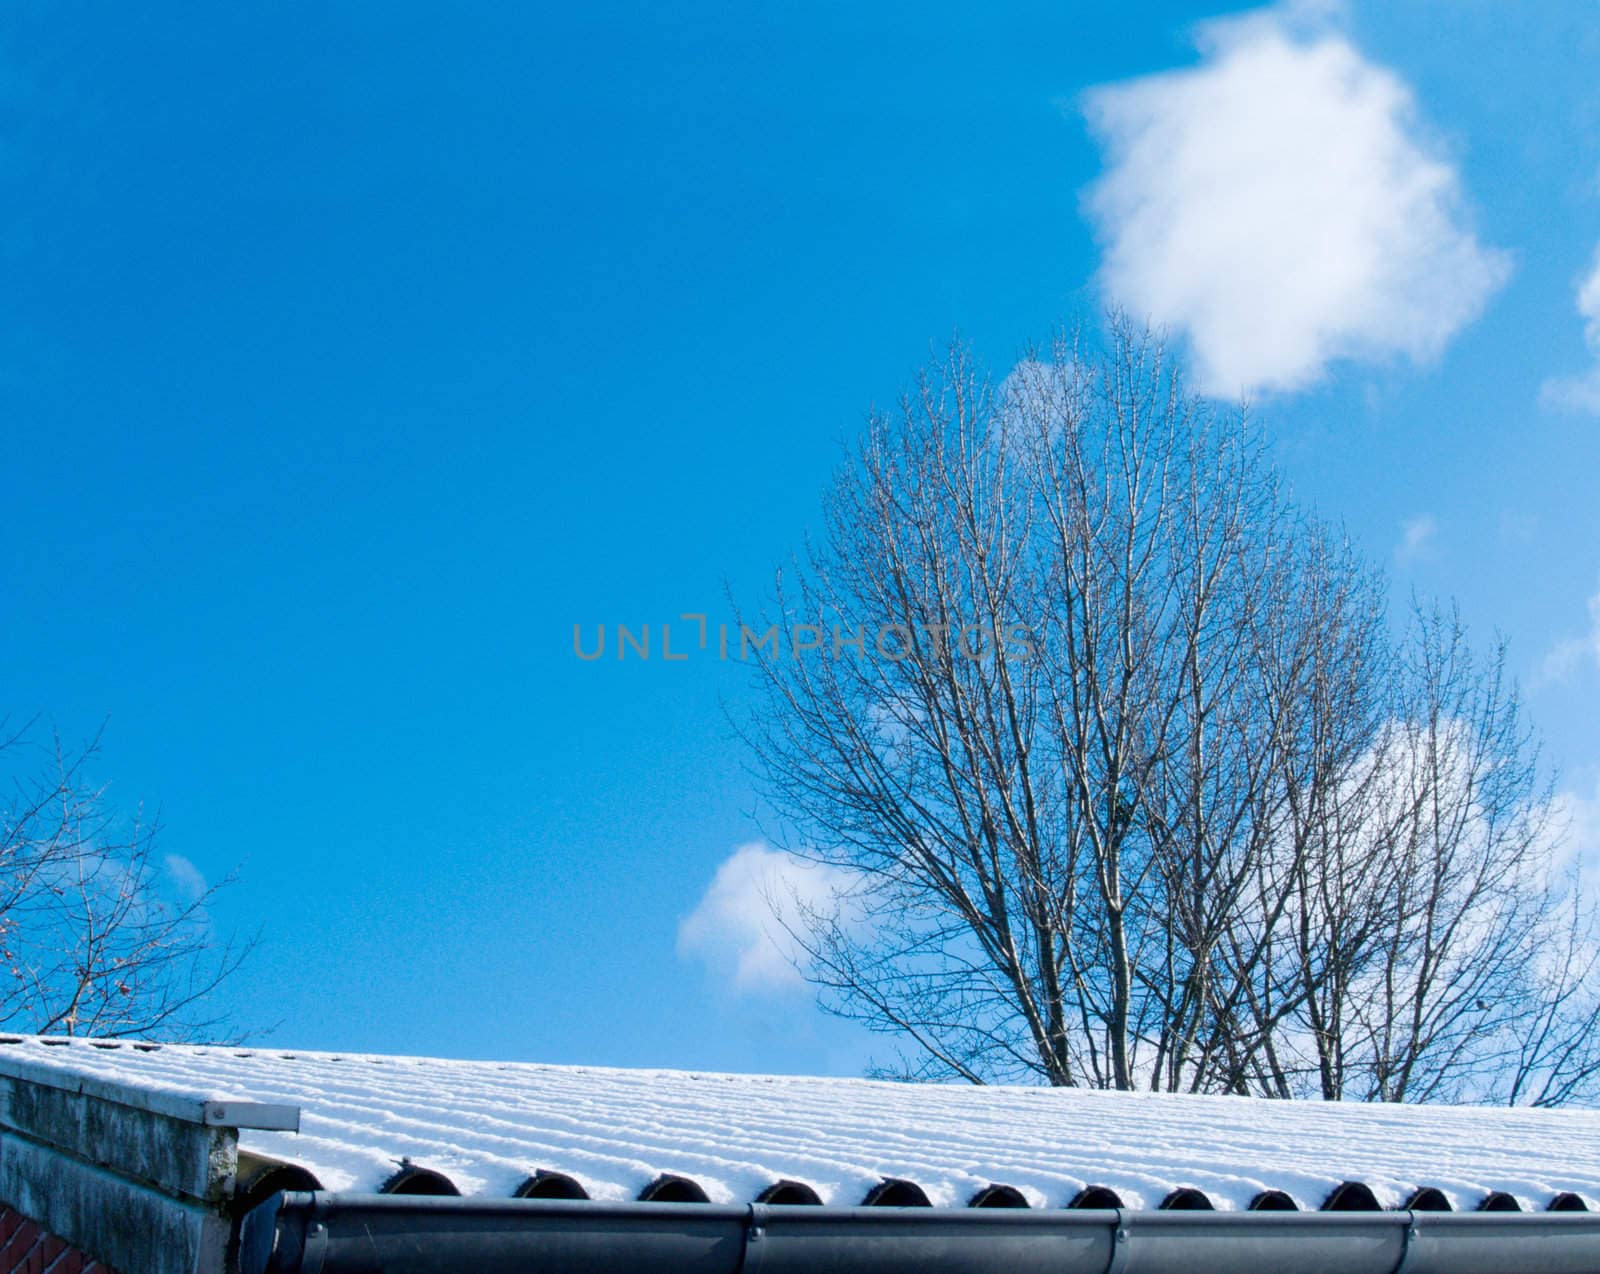 Winter time - Snow on rooftops wth copyspace